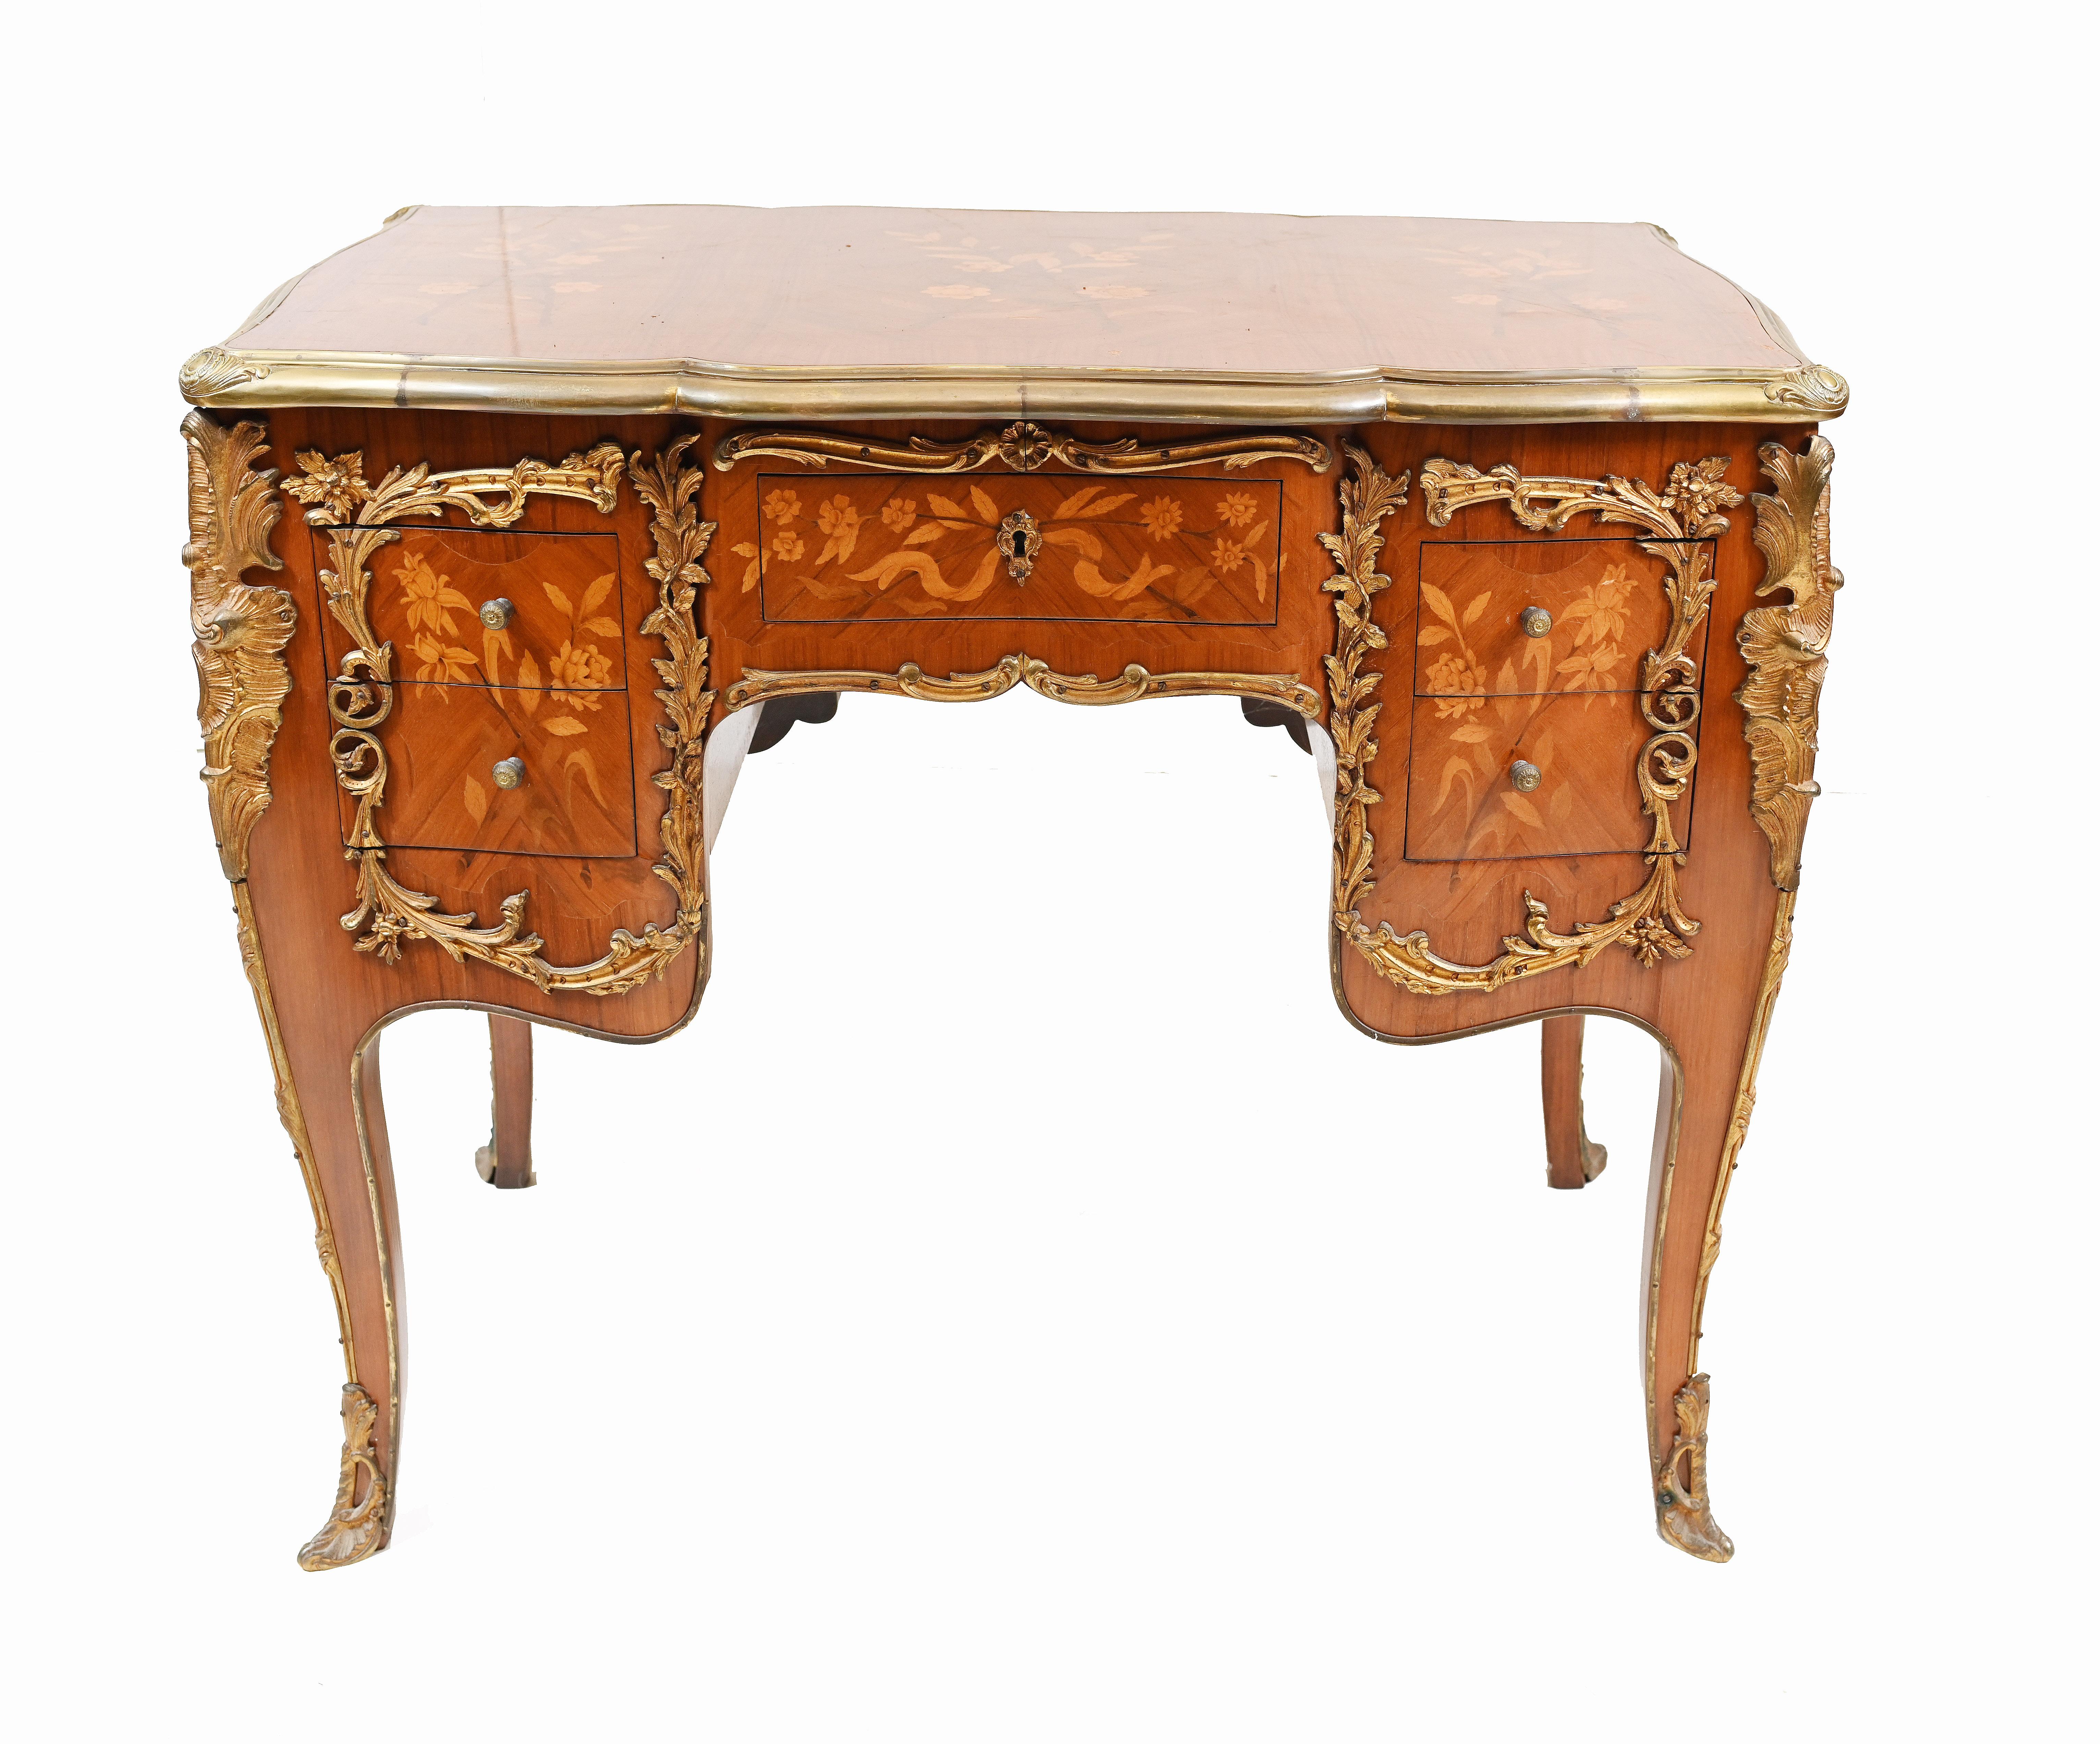 Very cute French knee hole desk in the Empire manner.
Antique desk we date to circa 1930.
Features intricate marquetry inlay work showing floral motifs.
Ormolu fixtures also original.
Bought from a dealer on Marche Biron at Paris antiques